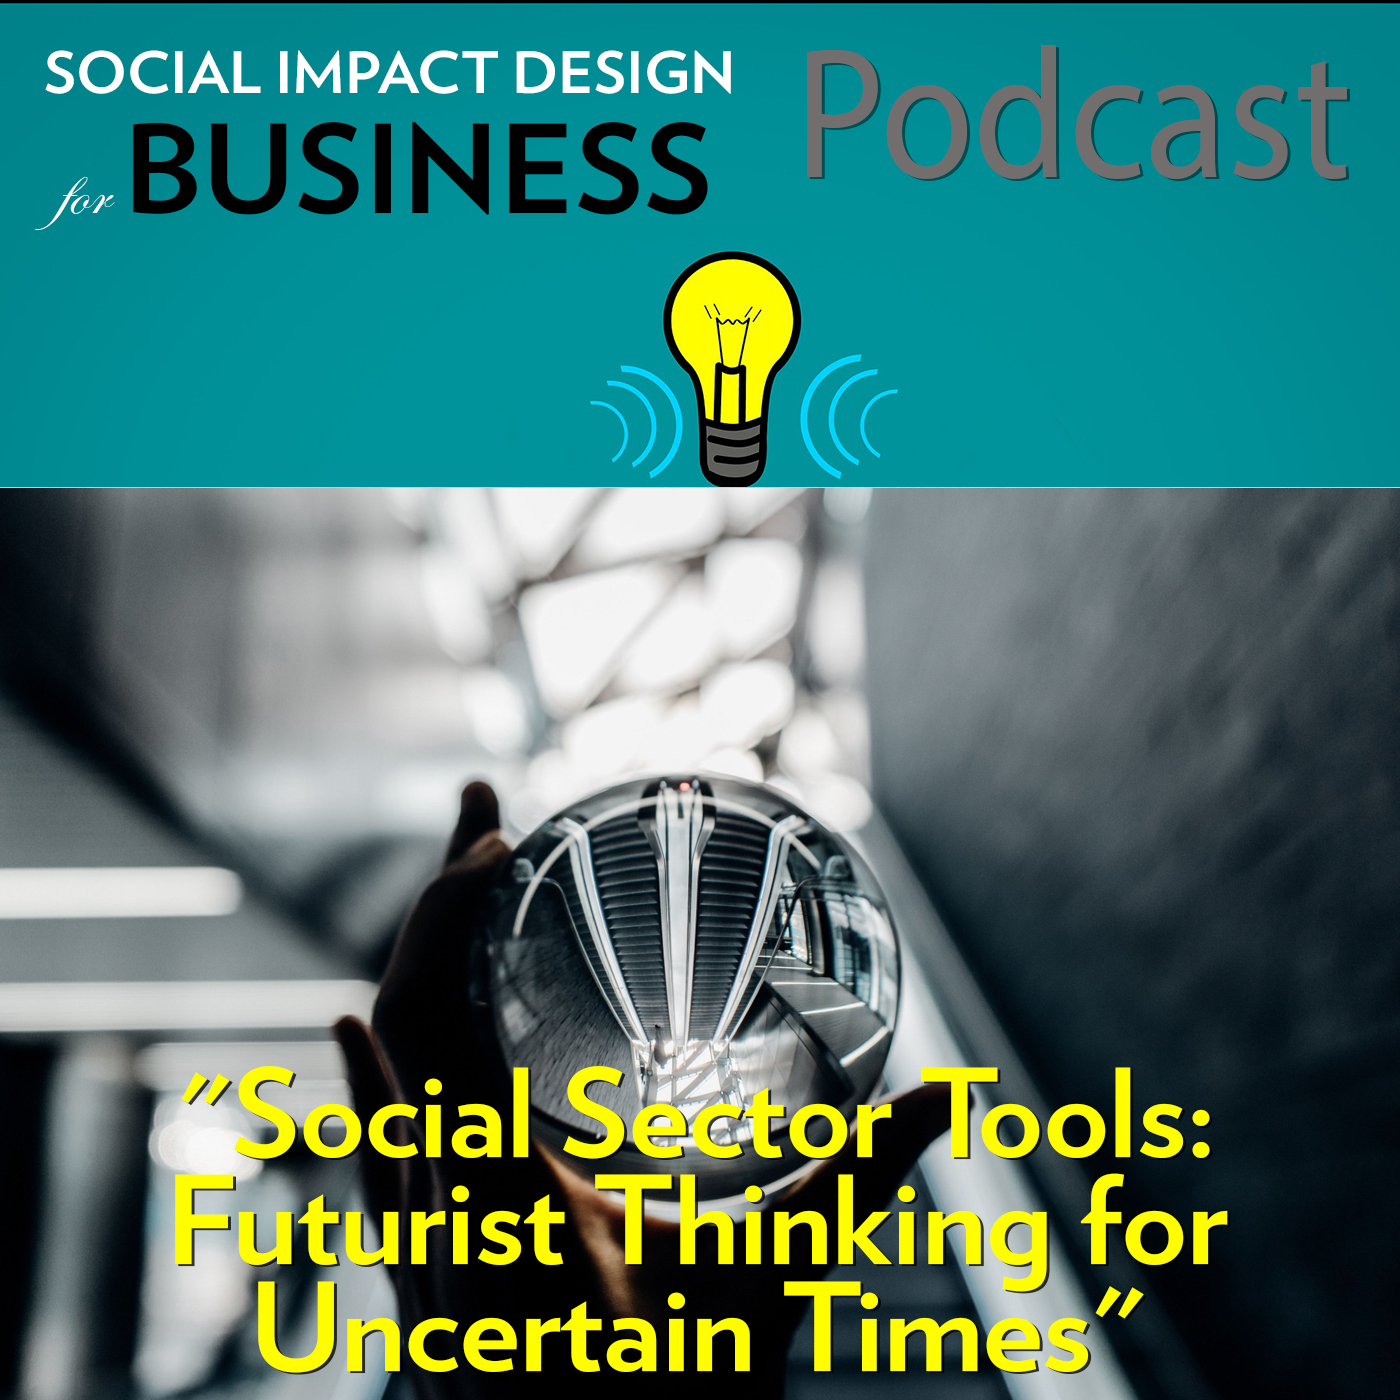 Podcast: Social Sector Tools – Futurist Thinking for Uncertain Times